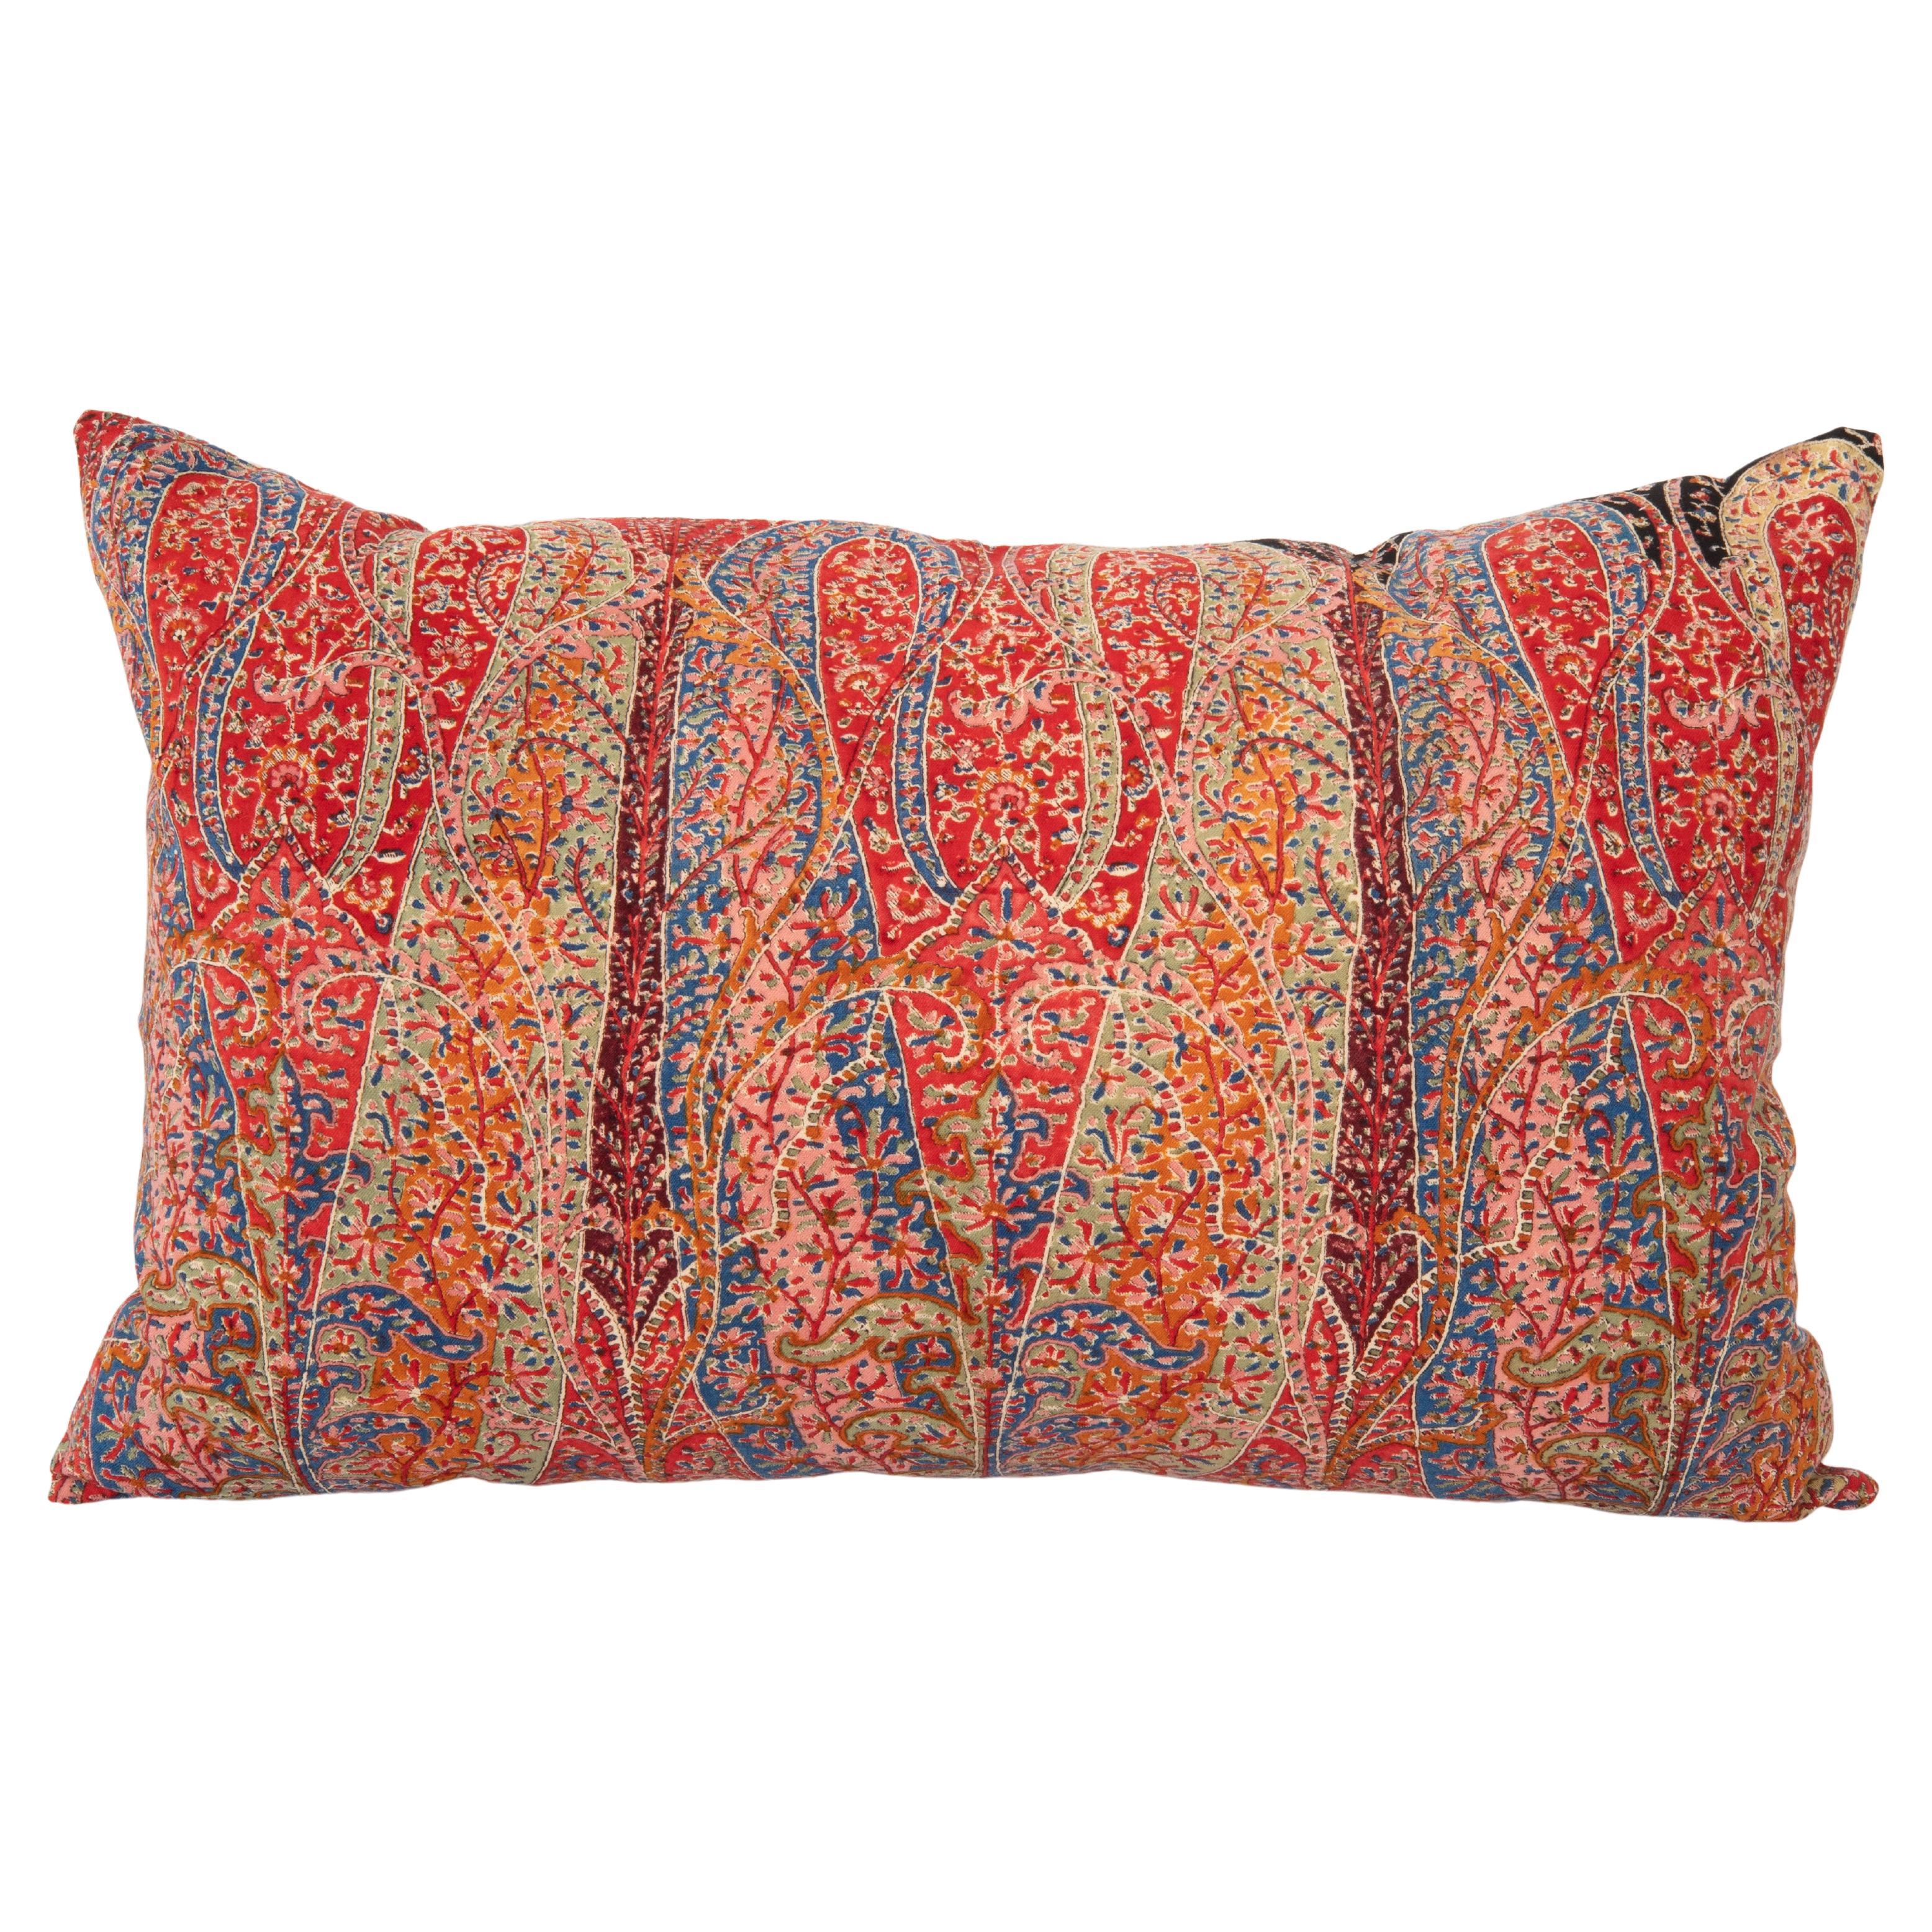 Pillow Cover Made from a an Antique Printed Scottish Paisley Shawl For Sale